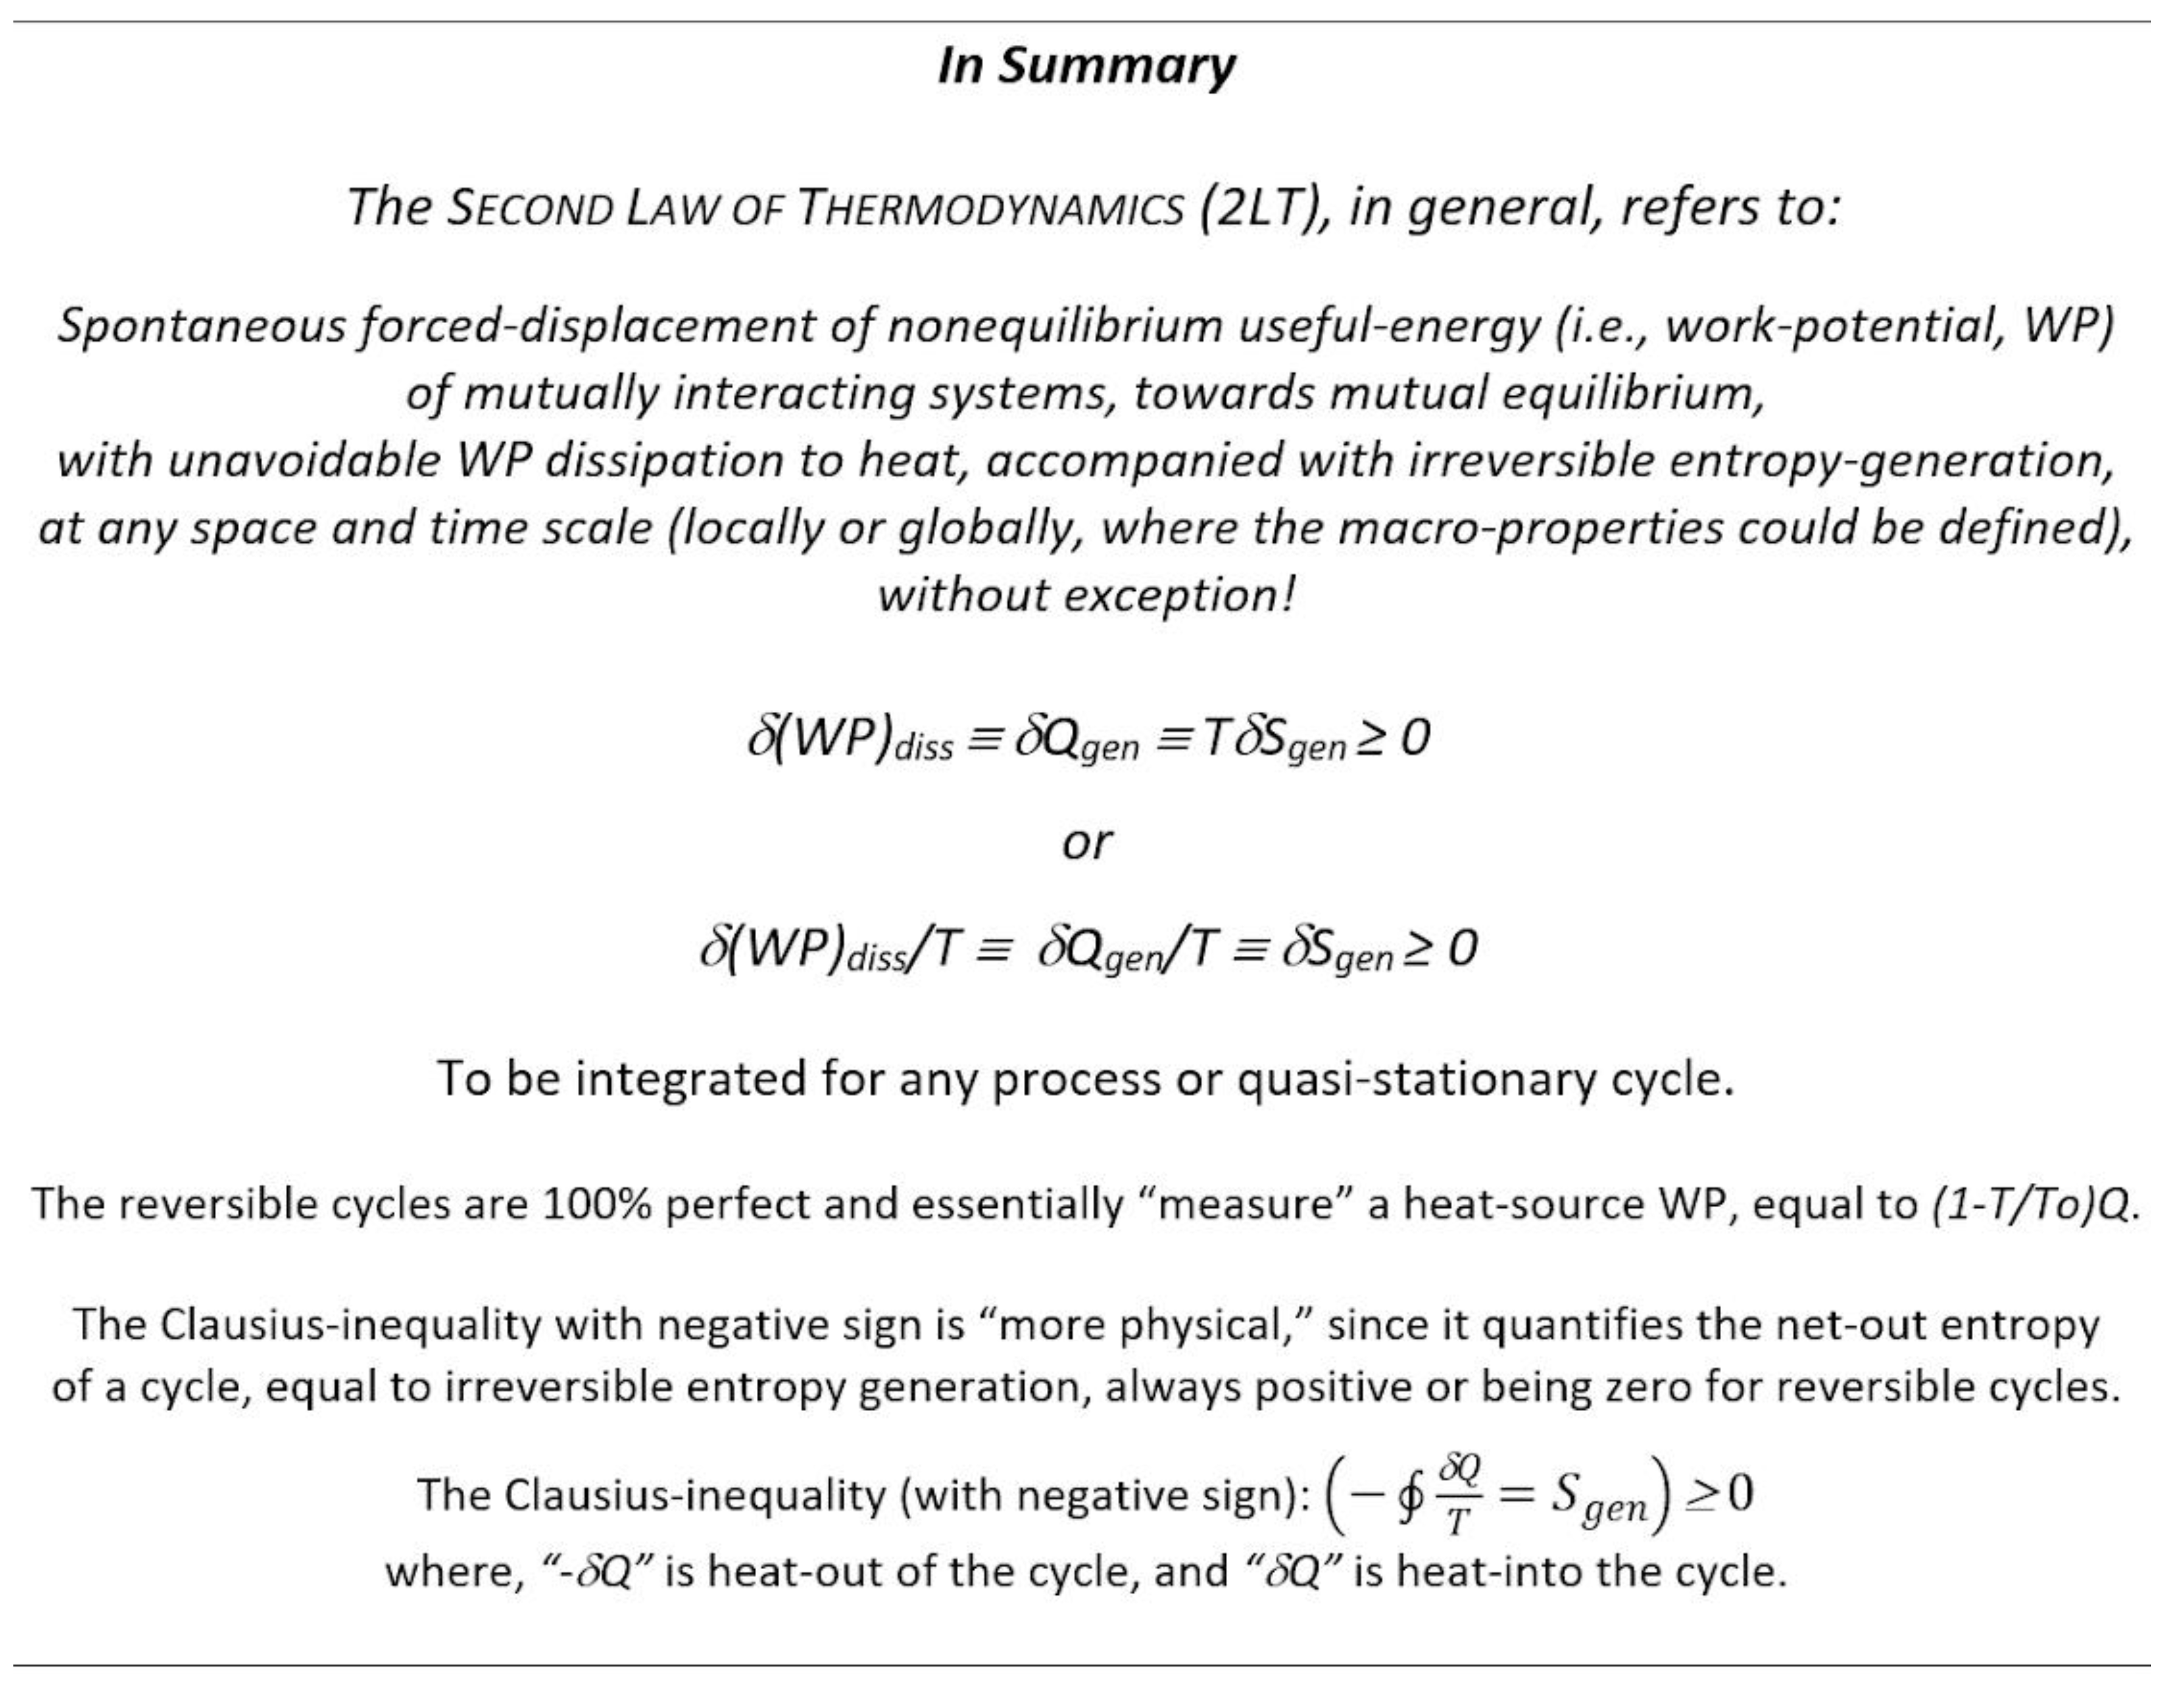 second law of thermodynamics equation